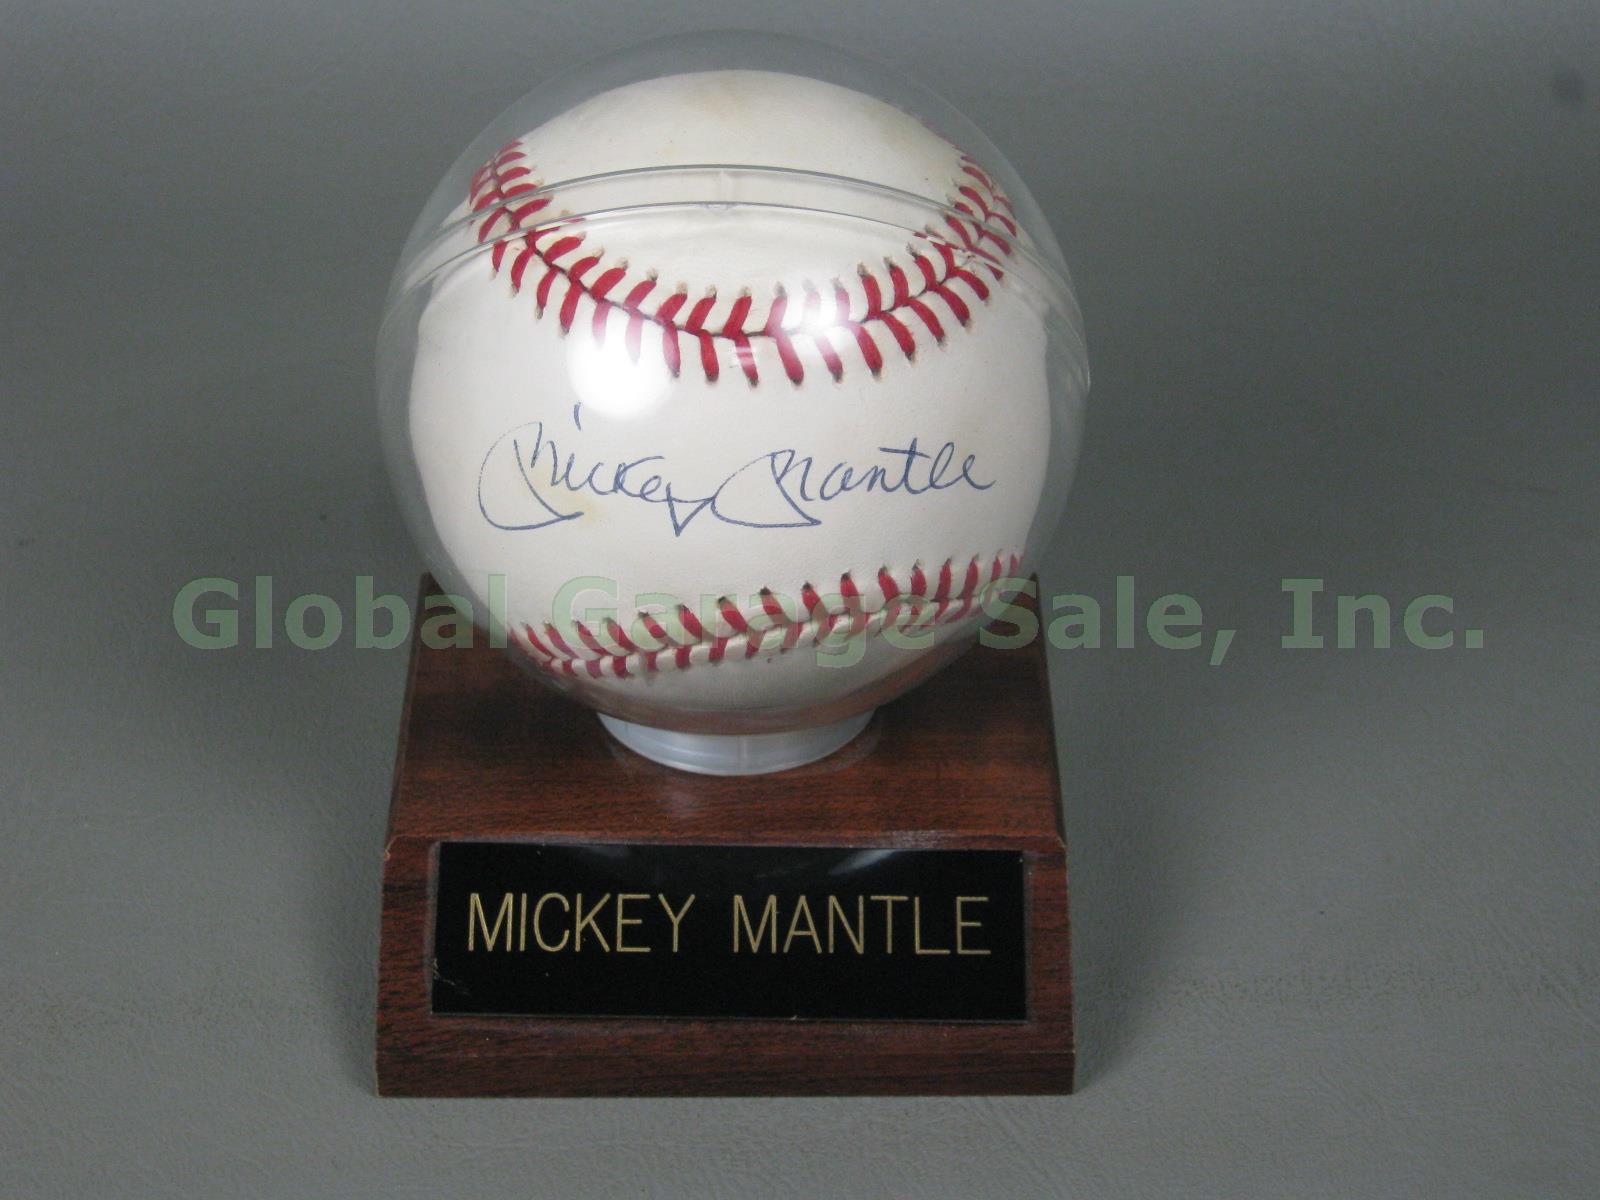 Authentic Mickey Mantle Autograph Signed Official American League Baseball NR!